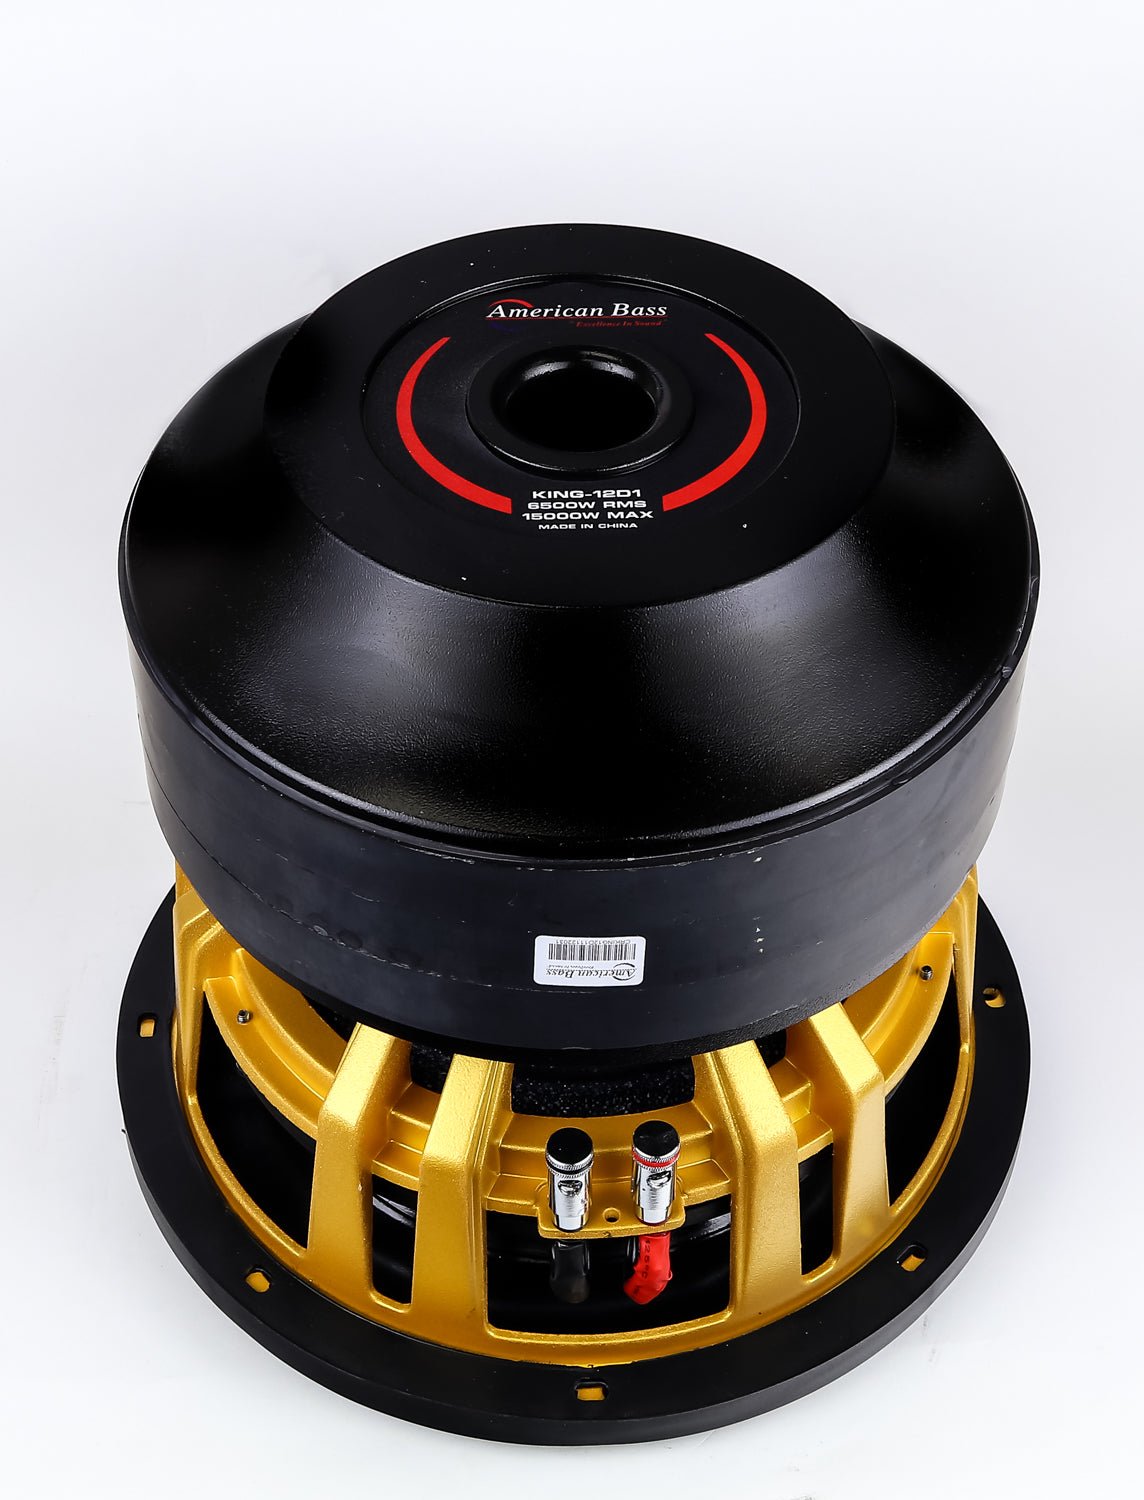 King 12" Subwoofer - American Bass Audio